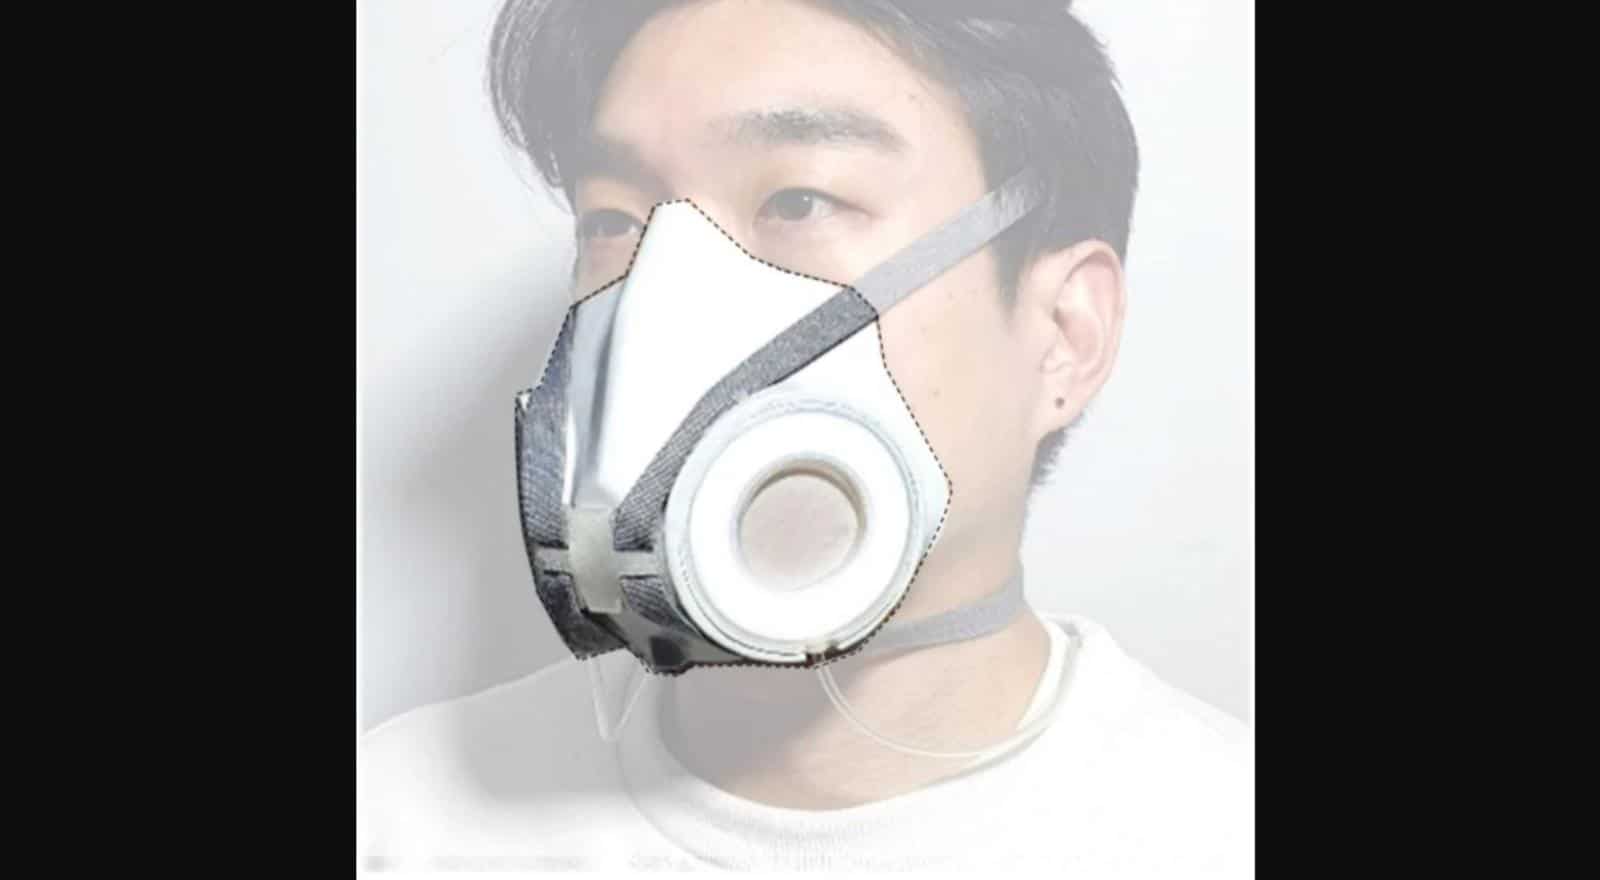 This smart mask will give you freedom and effectiveness when needed